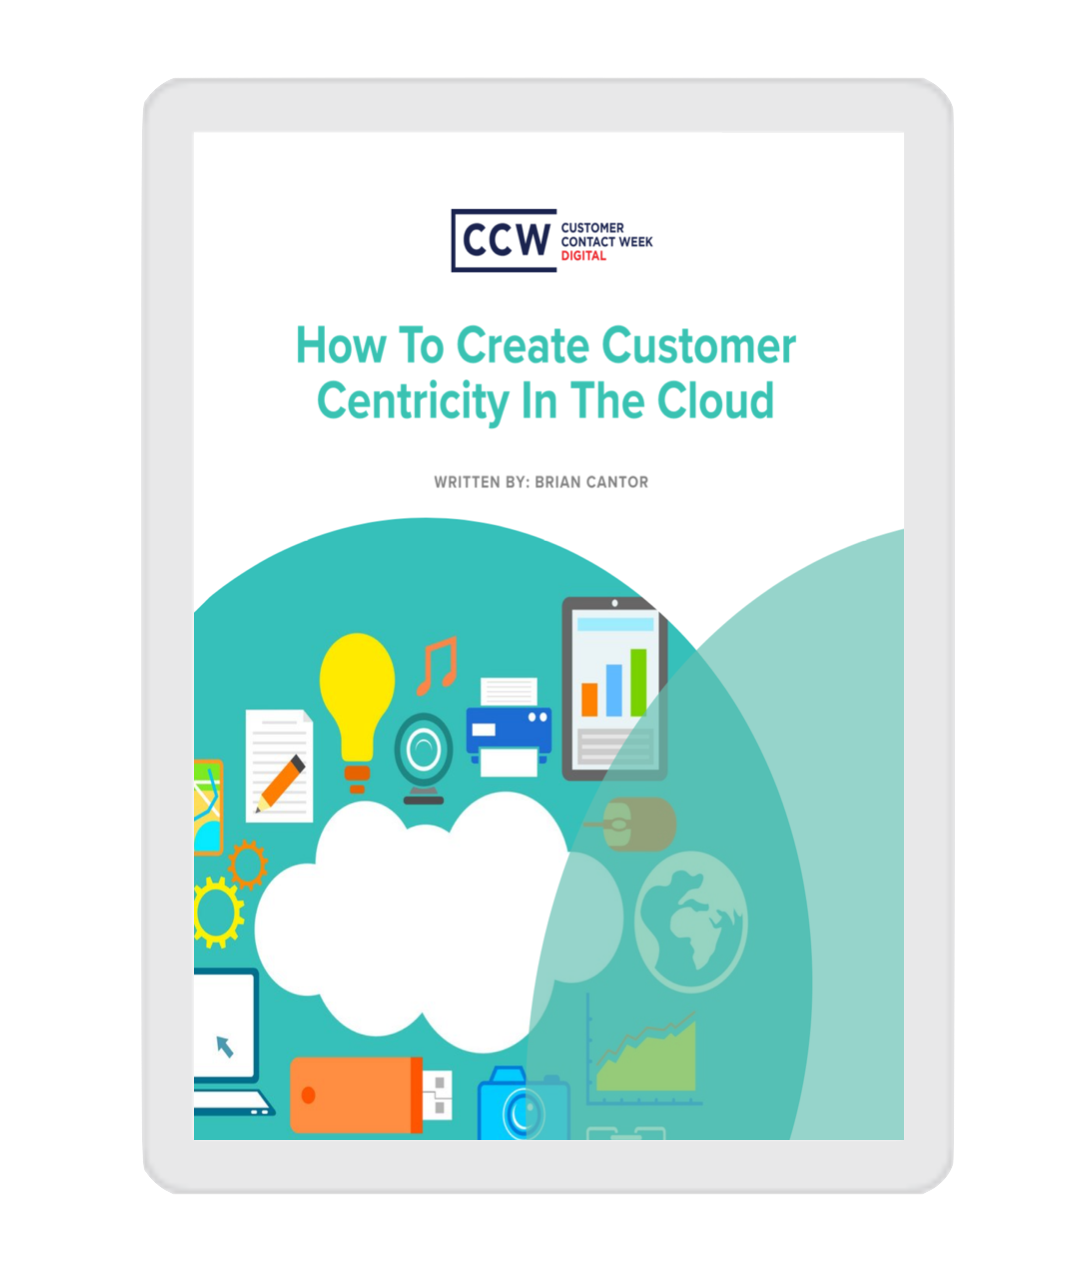 How to create customer centric in the cloud